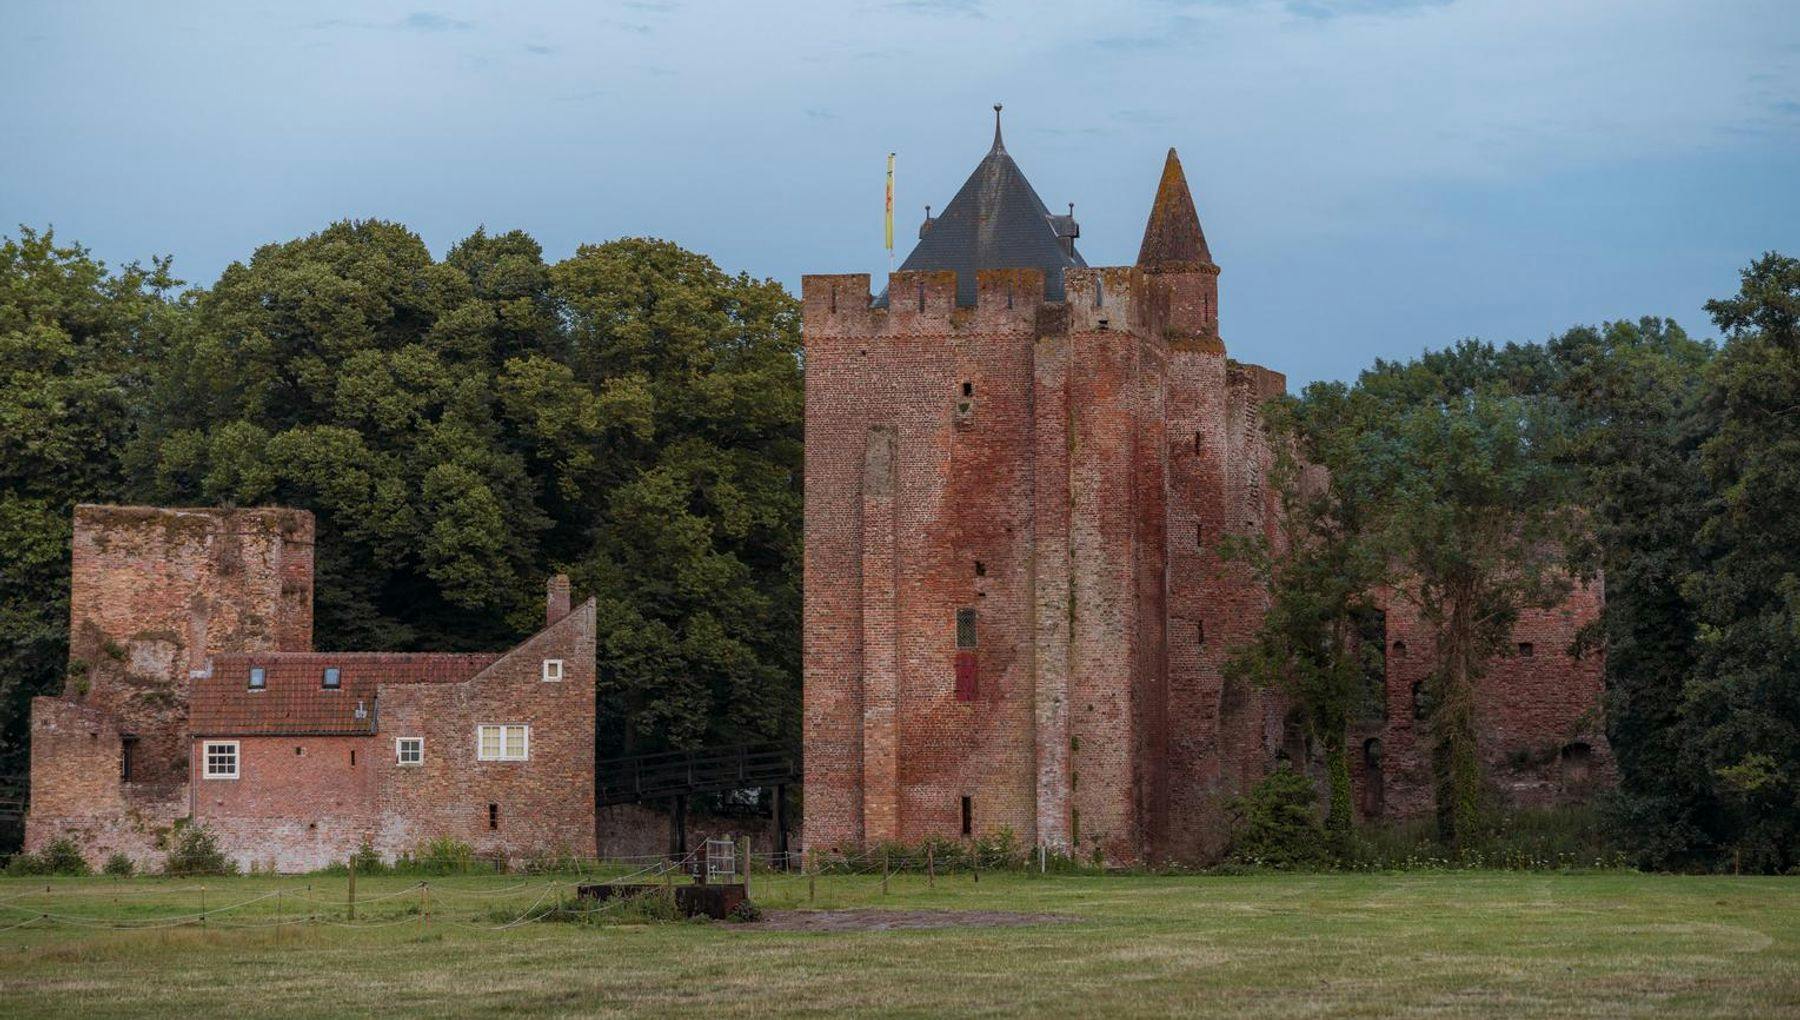 The ruins of Brederode are the remnants of castle Brederode near Santpoort-Zuid.